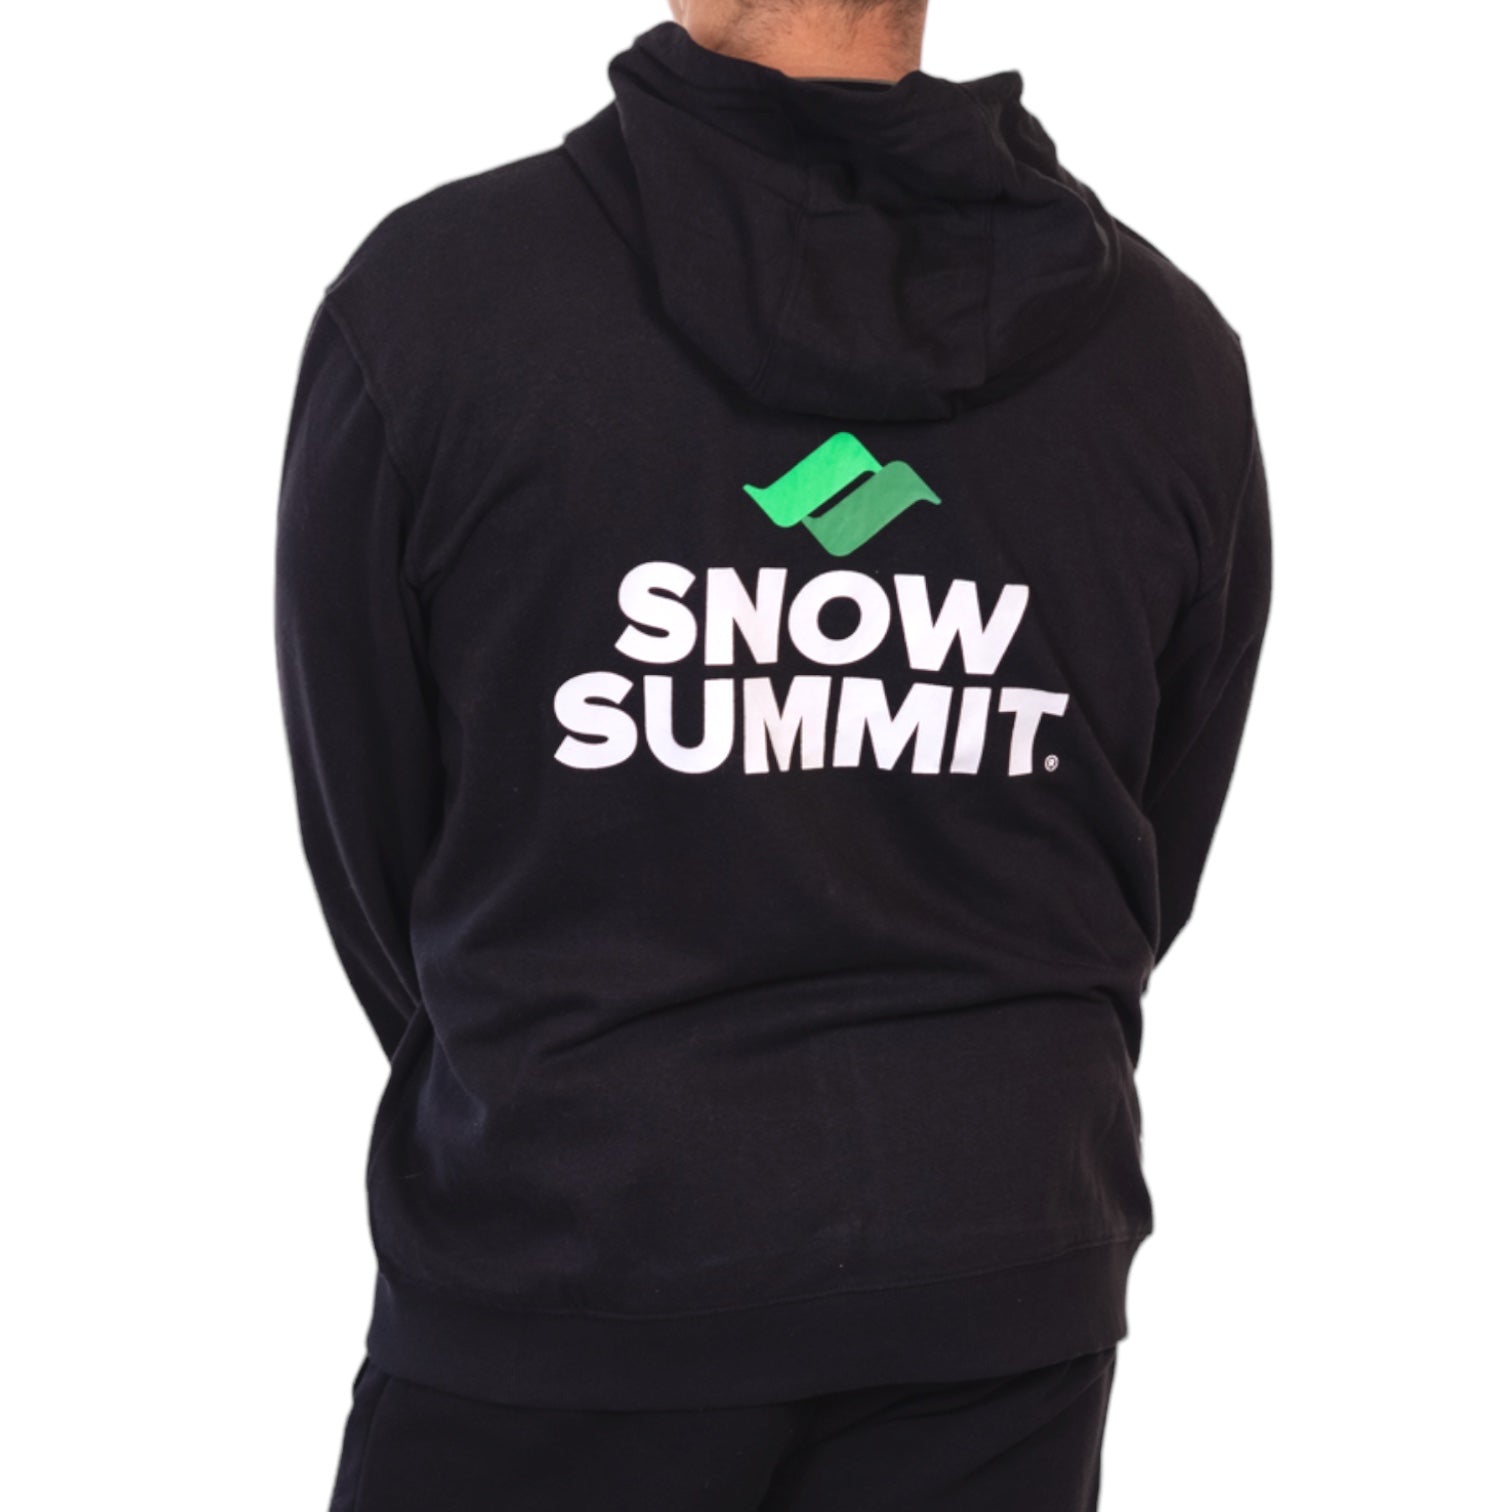 Back of black zip up with snow summit logo in middle